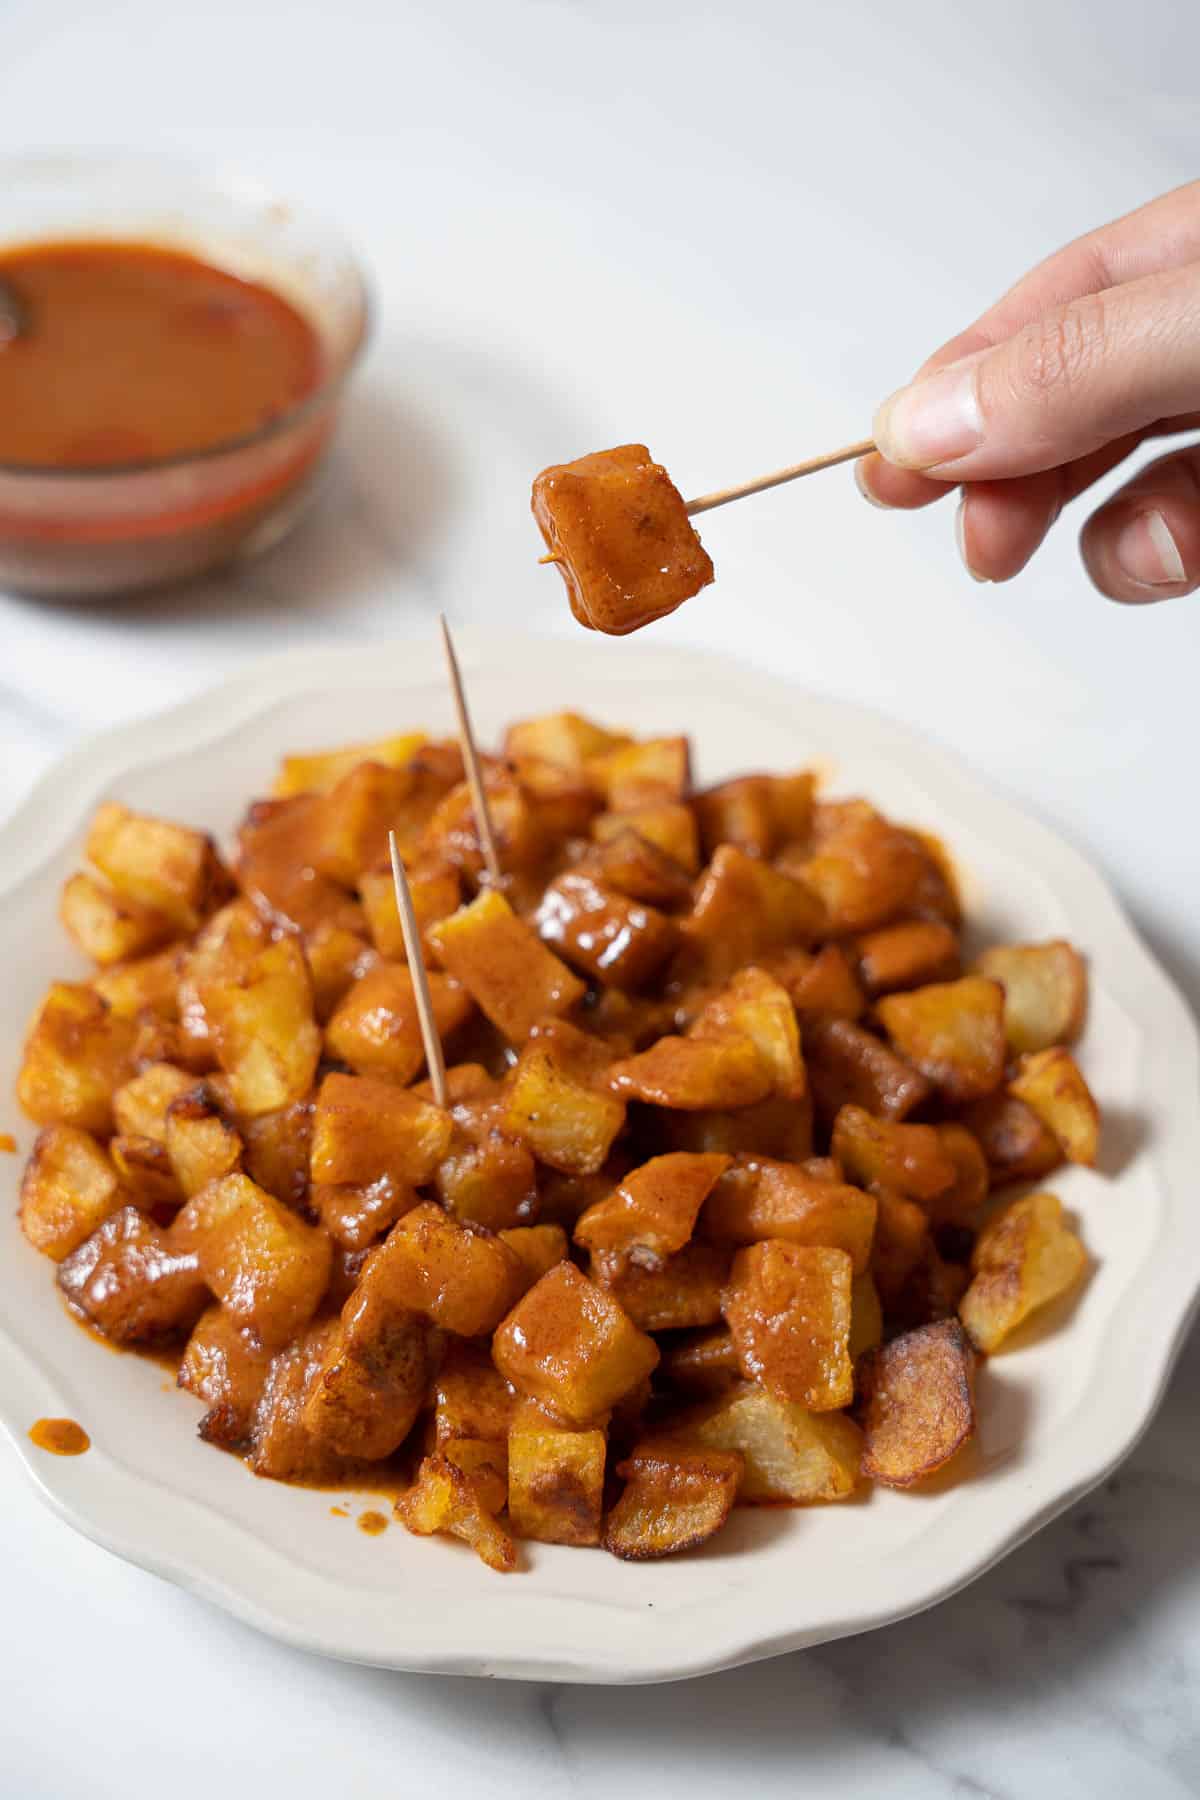 holding a patata covered in bravas sauce on a toothpick.